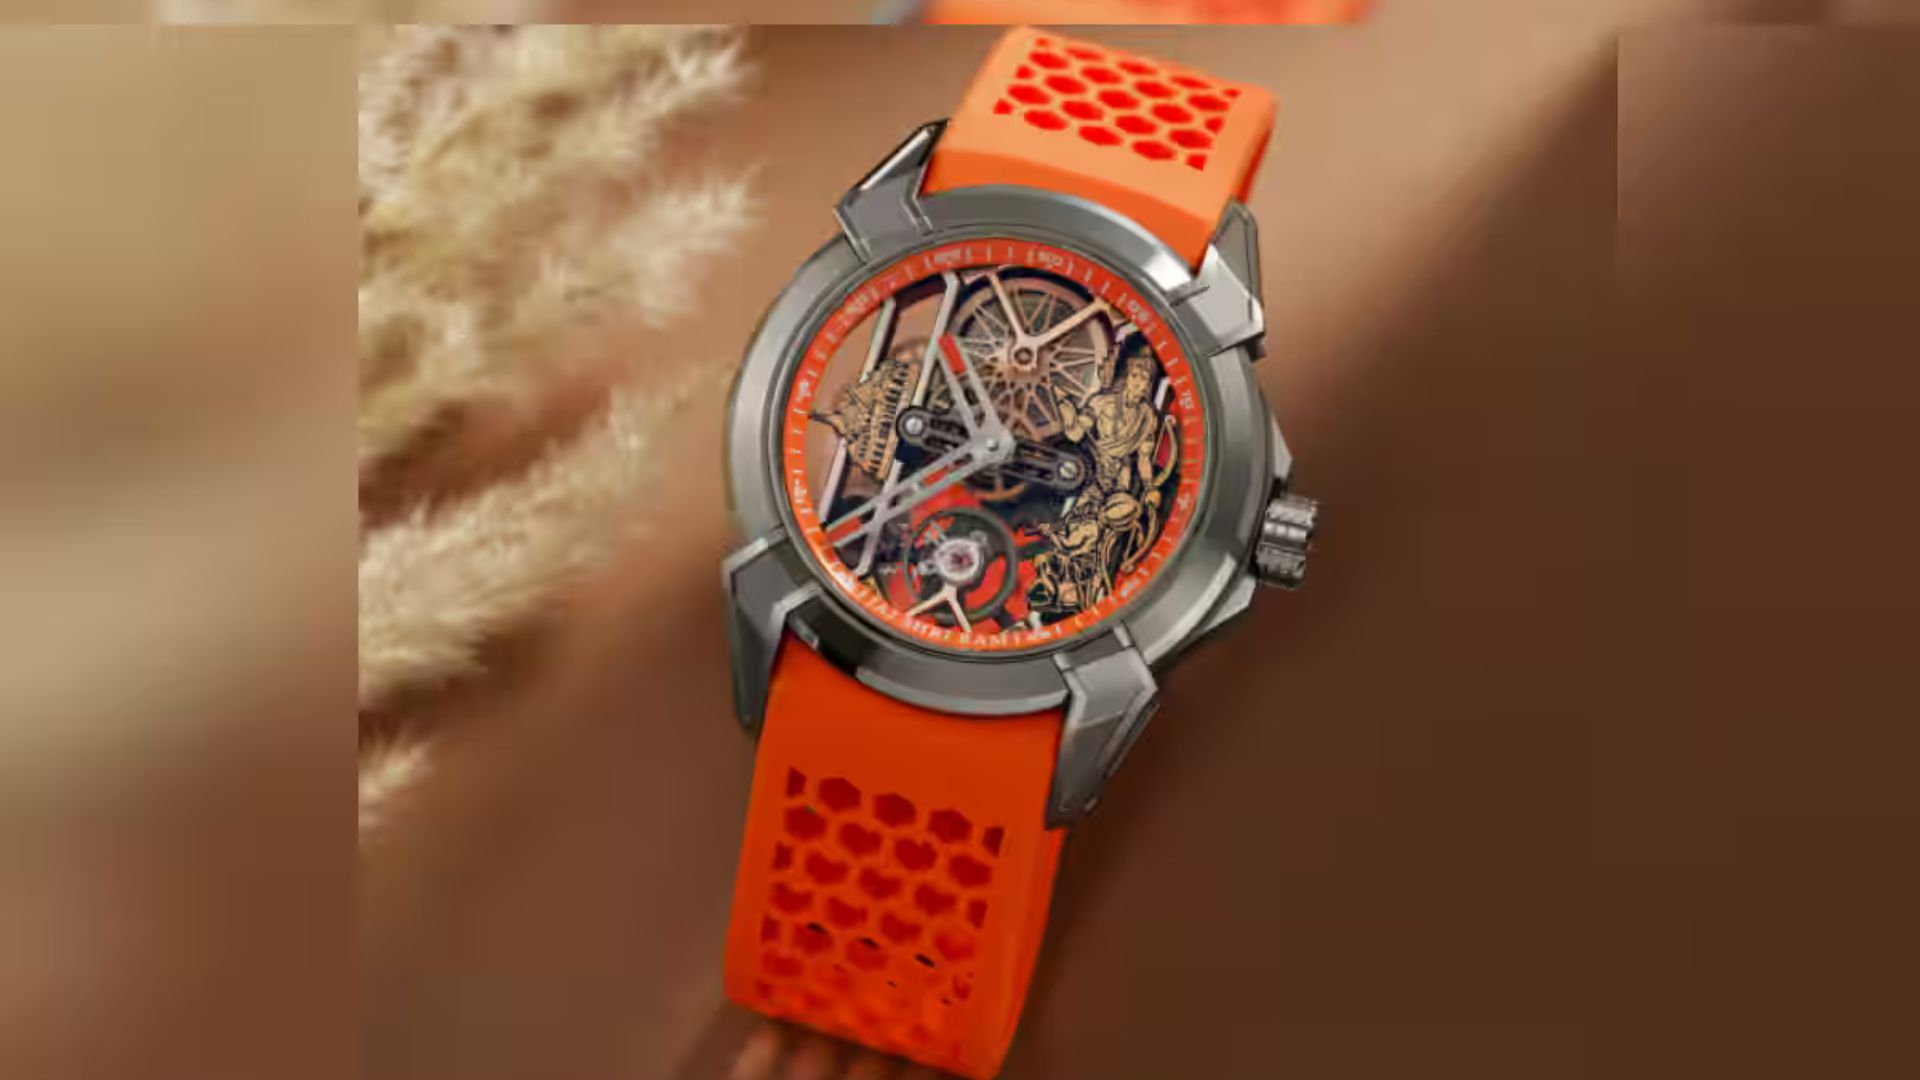 Ram Mandir Limited Edition Watch For Whopping Rs 34 Lakh Creates Buzz Online